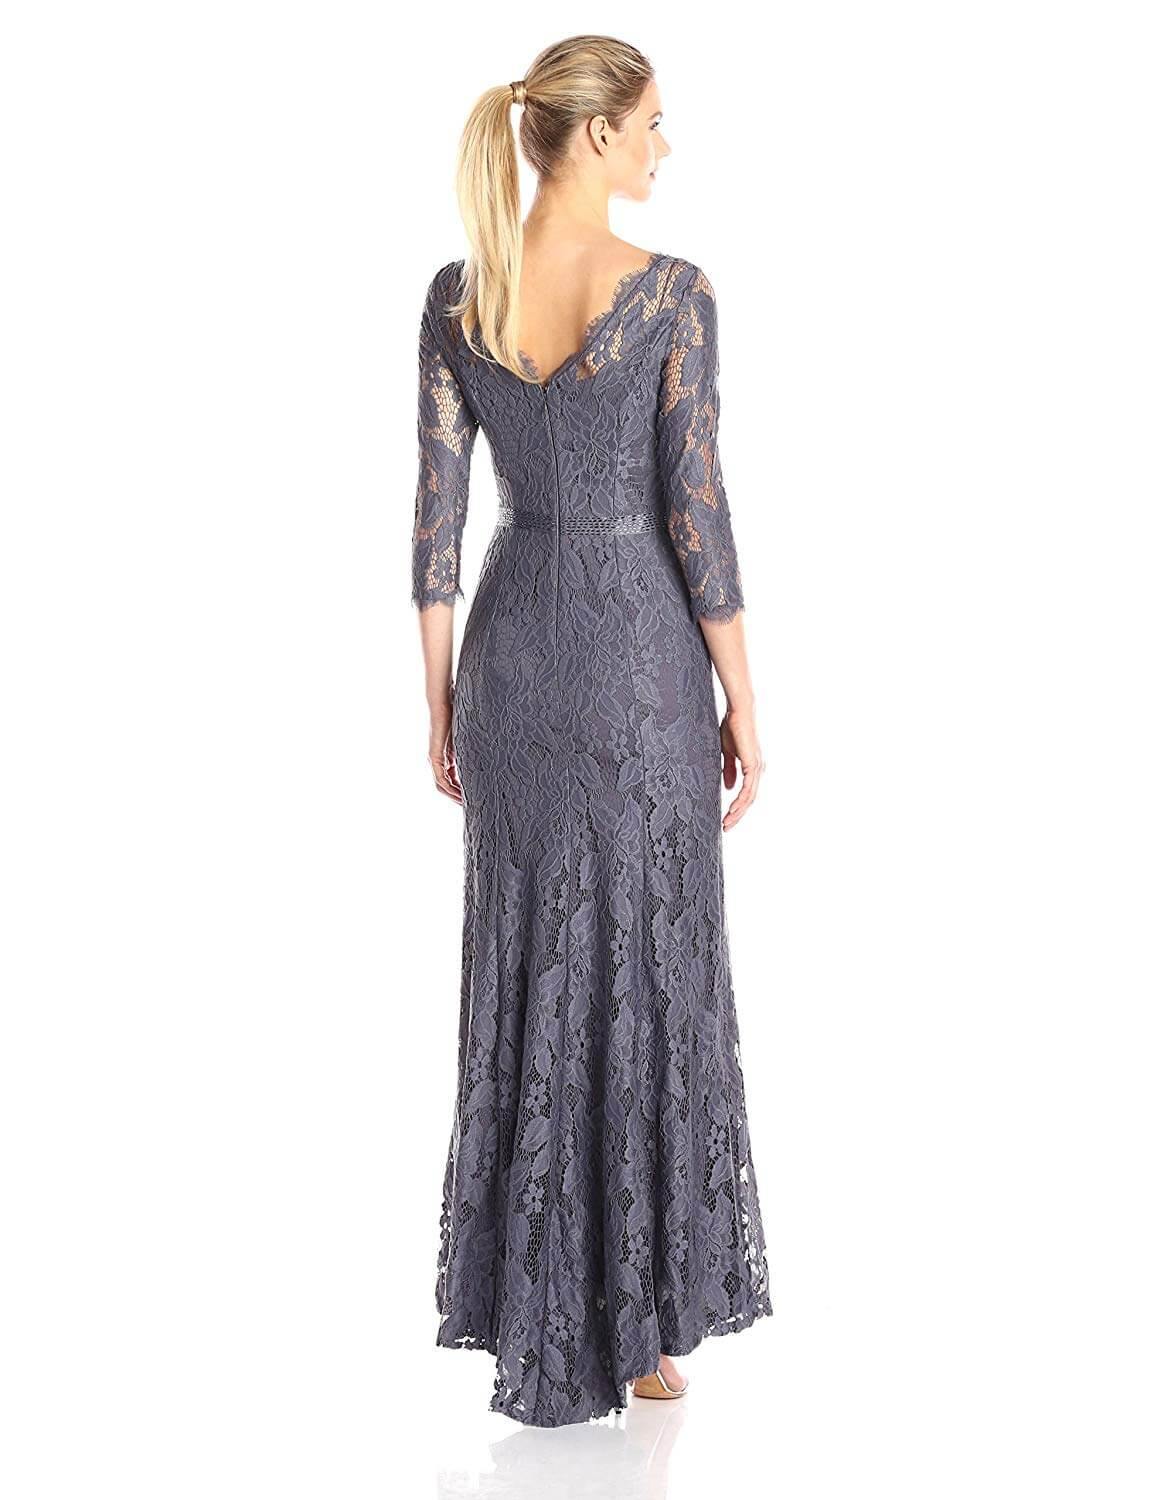 Adrianna Papell Long Formal Beaded Floral Lace Dress - The Dress Outlet Adrianna Papell